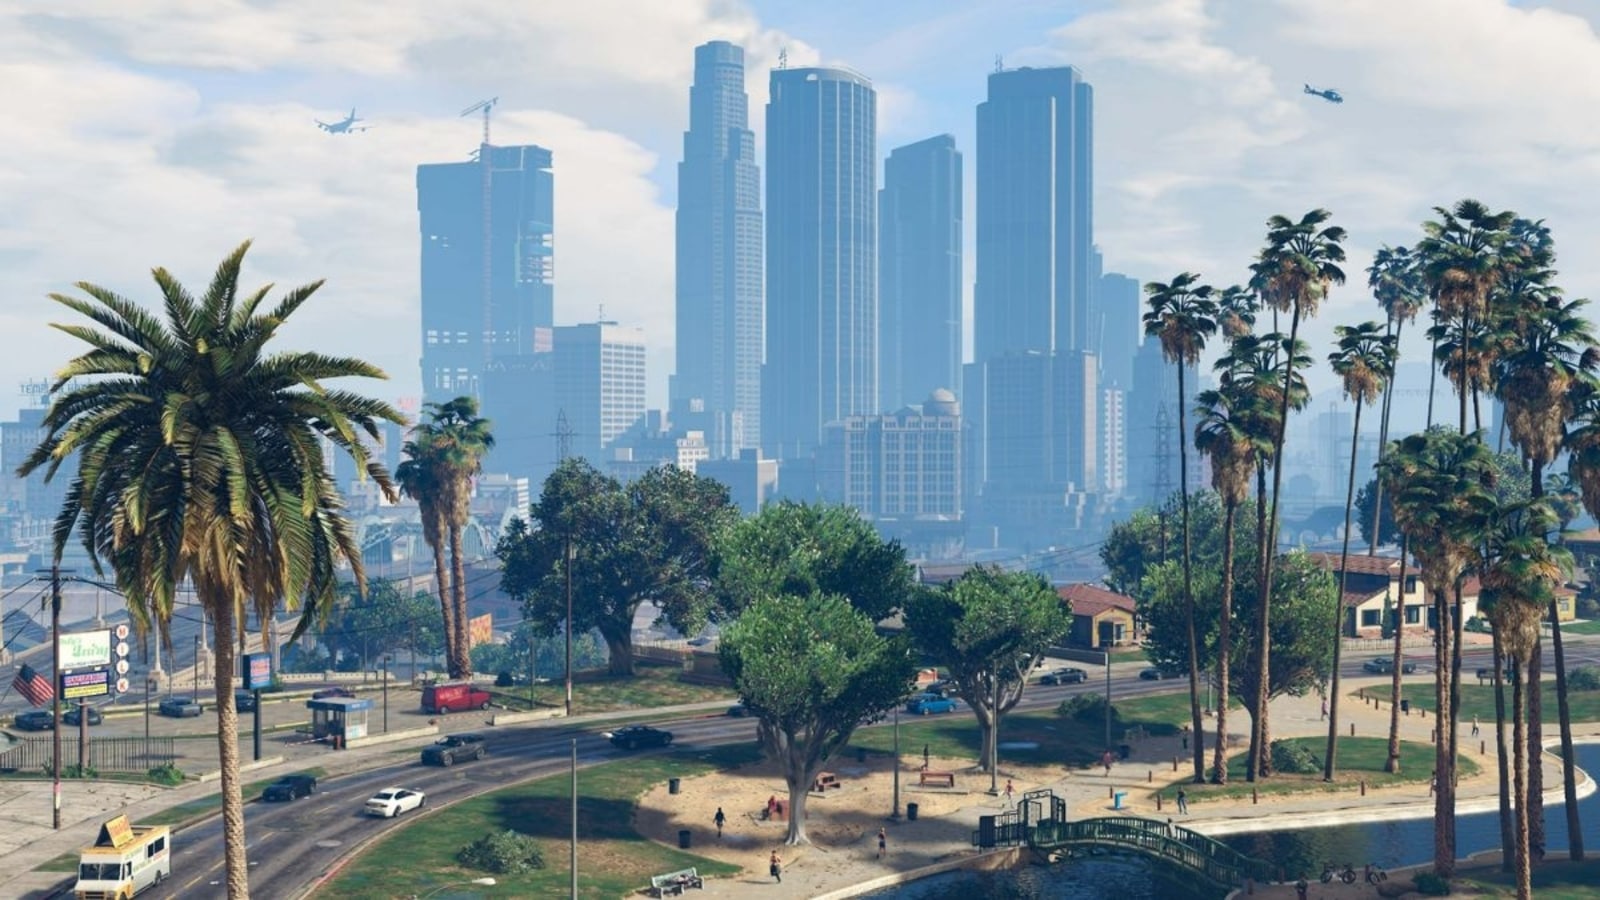 GTA 6 gameplay videos leaked. Shows city location and the new protagonists  - Technology News